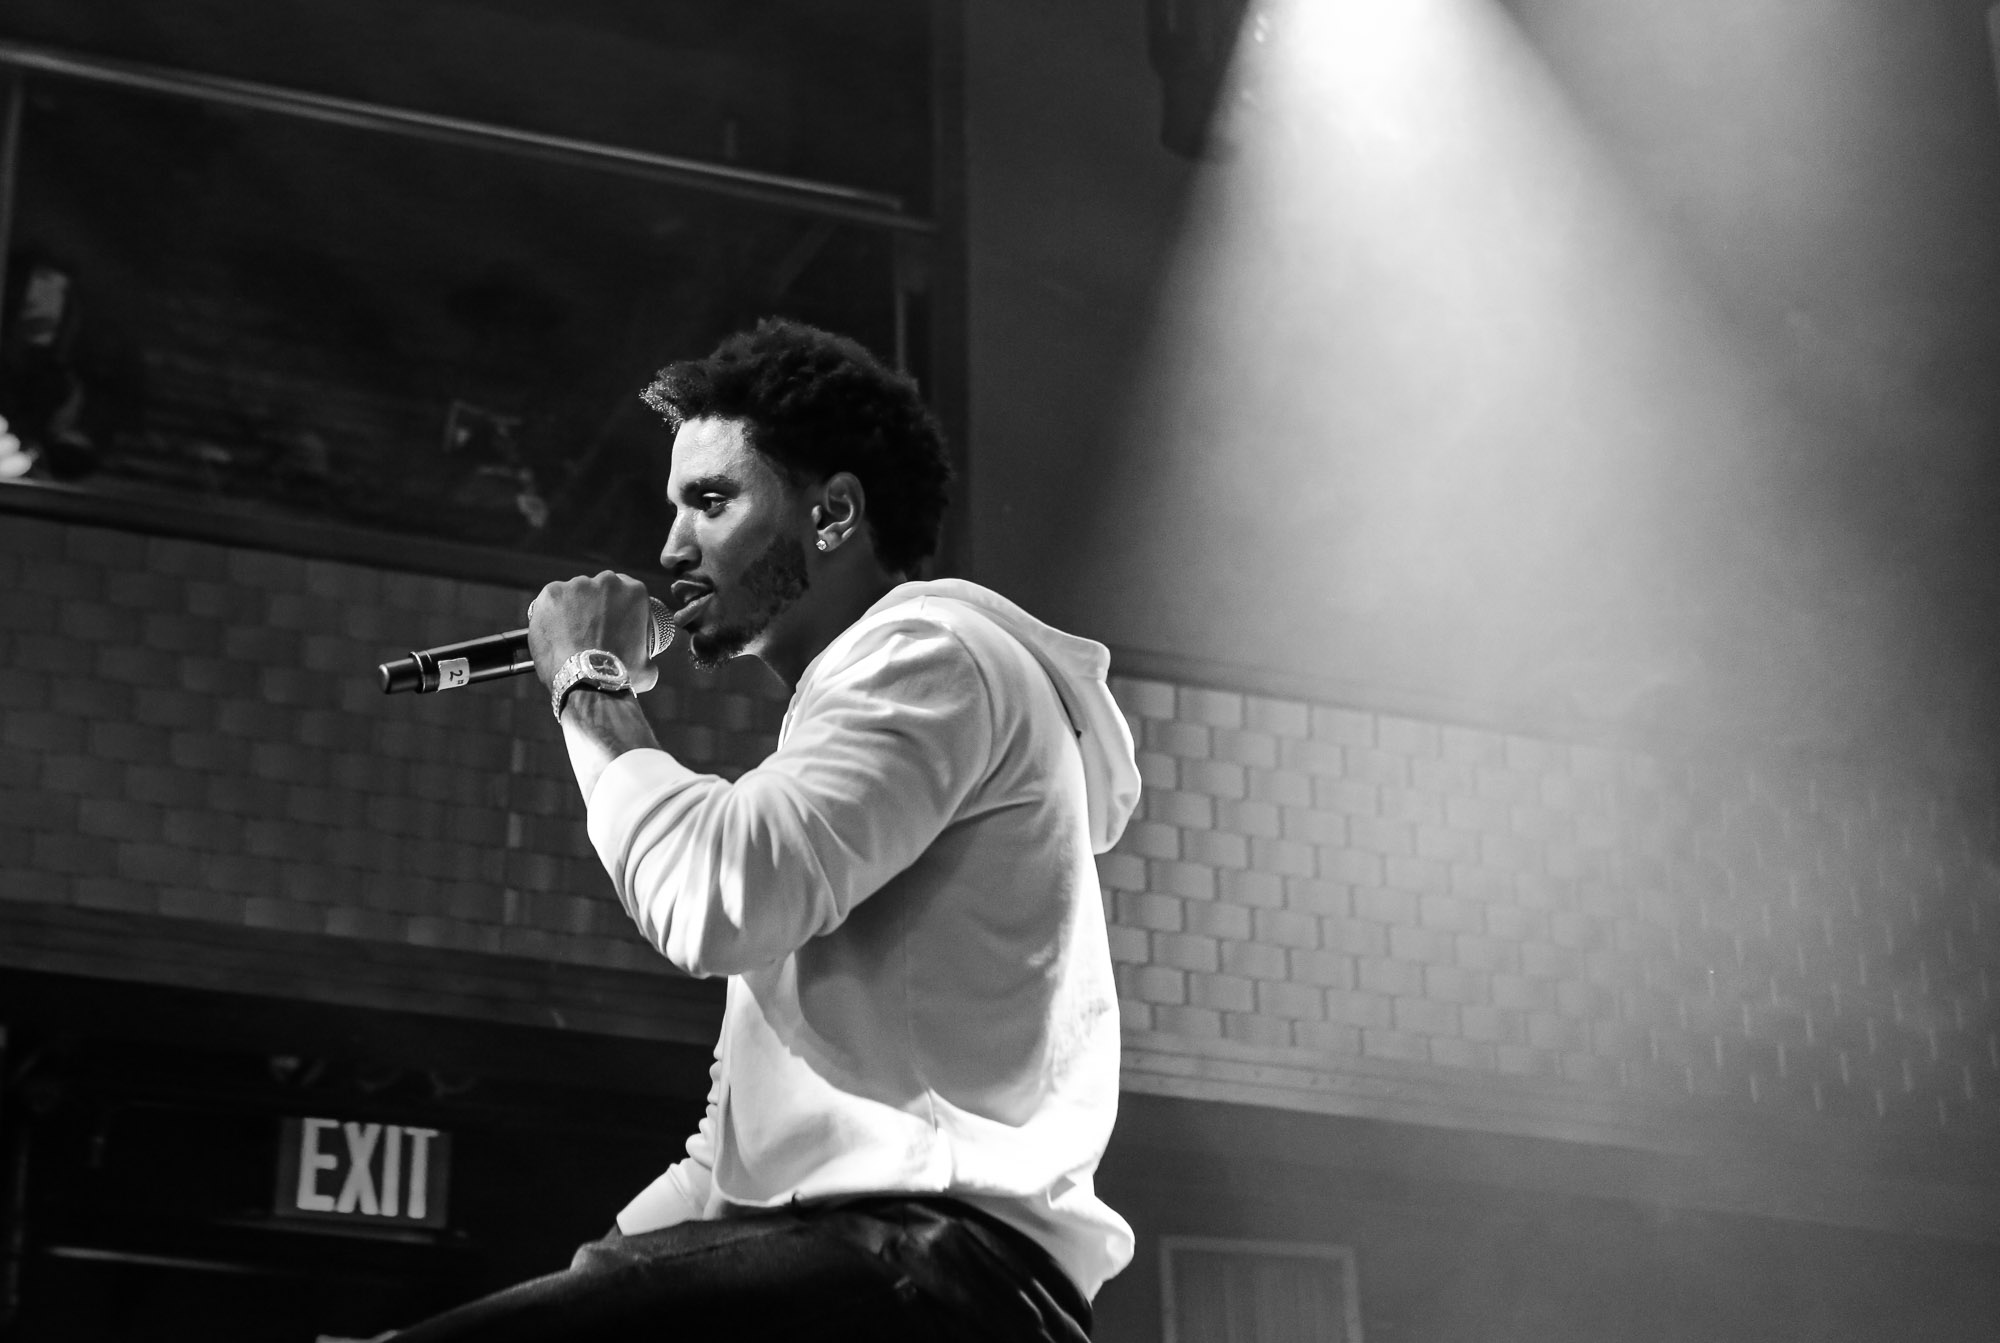 Rory Claims He Knows 15-20 Women Who Were Allegedly Assaulted By Trey Songz